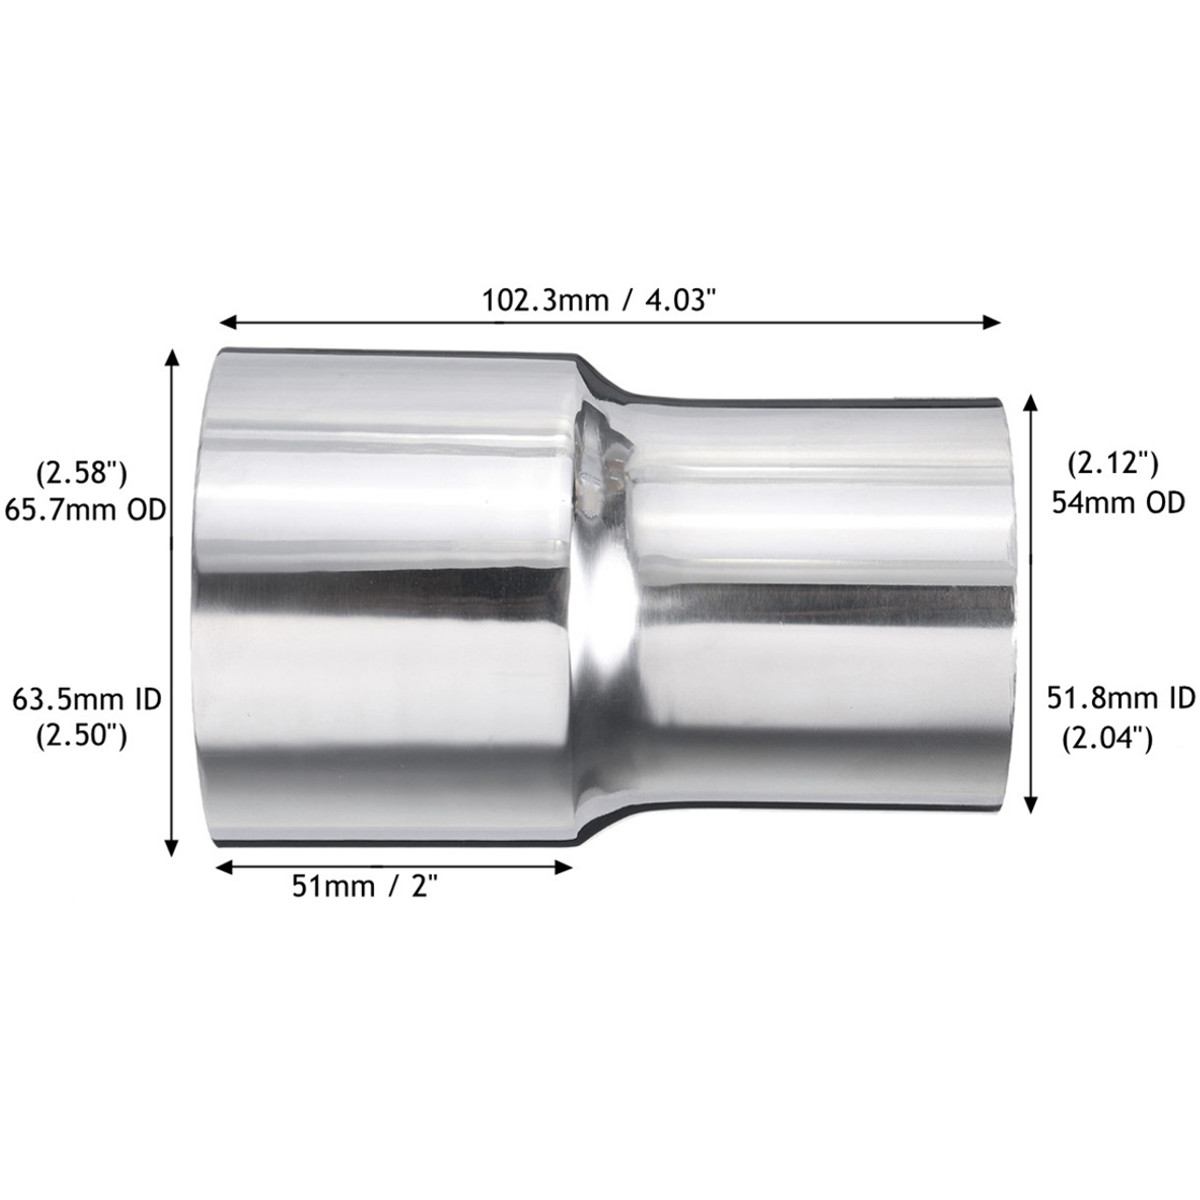 SDENSHI 3 to 4 Inch Turbo Exhaust Stainless Steel Reducer Adapter Pipe for Trucks 